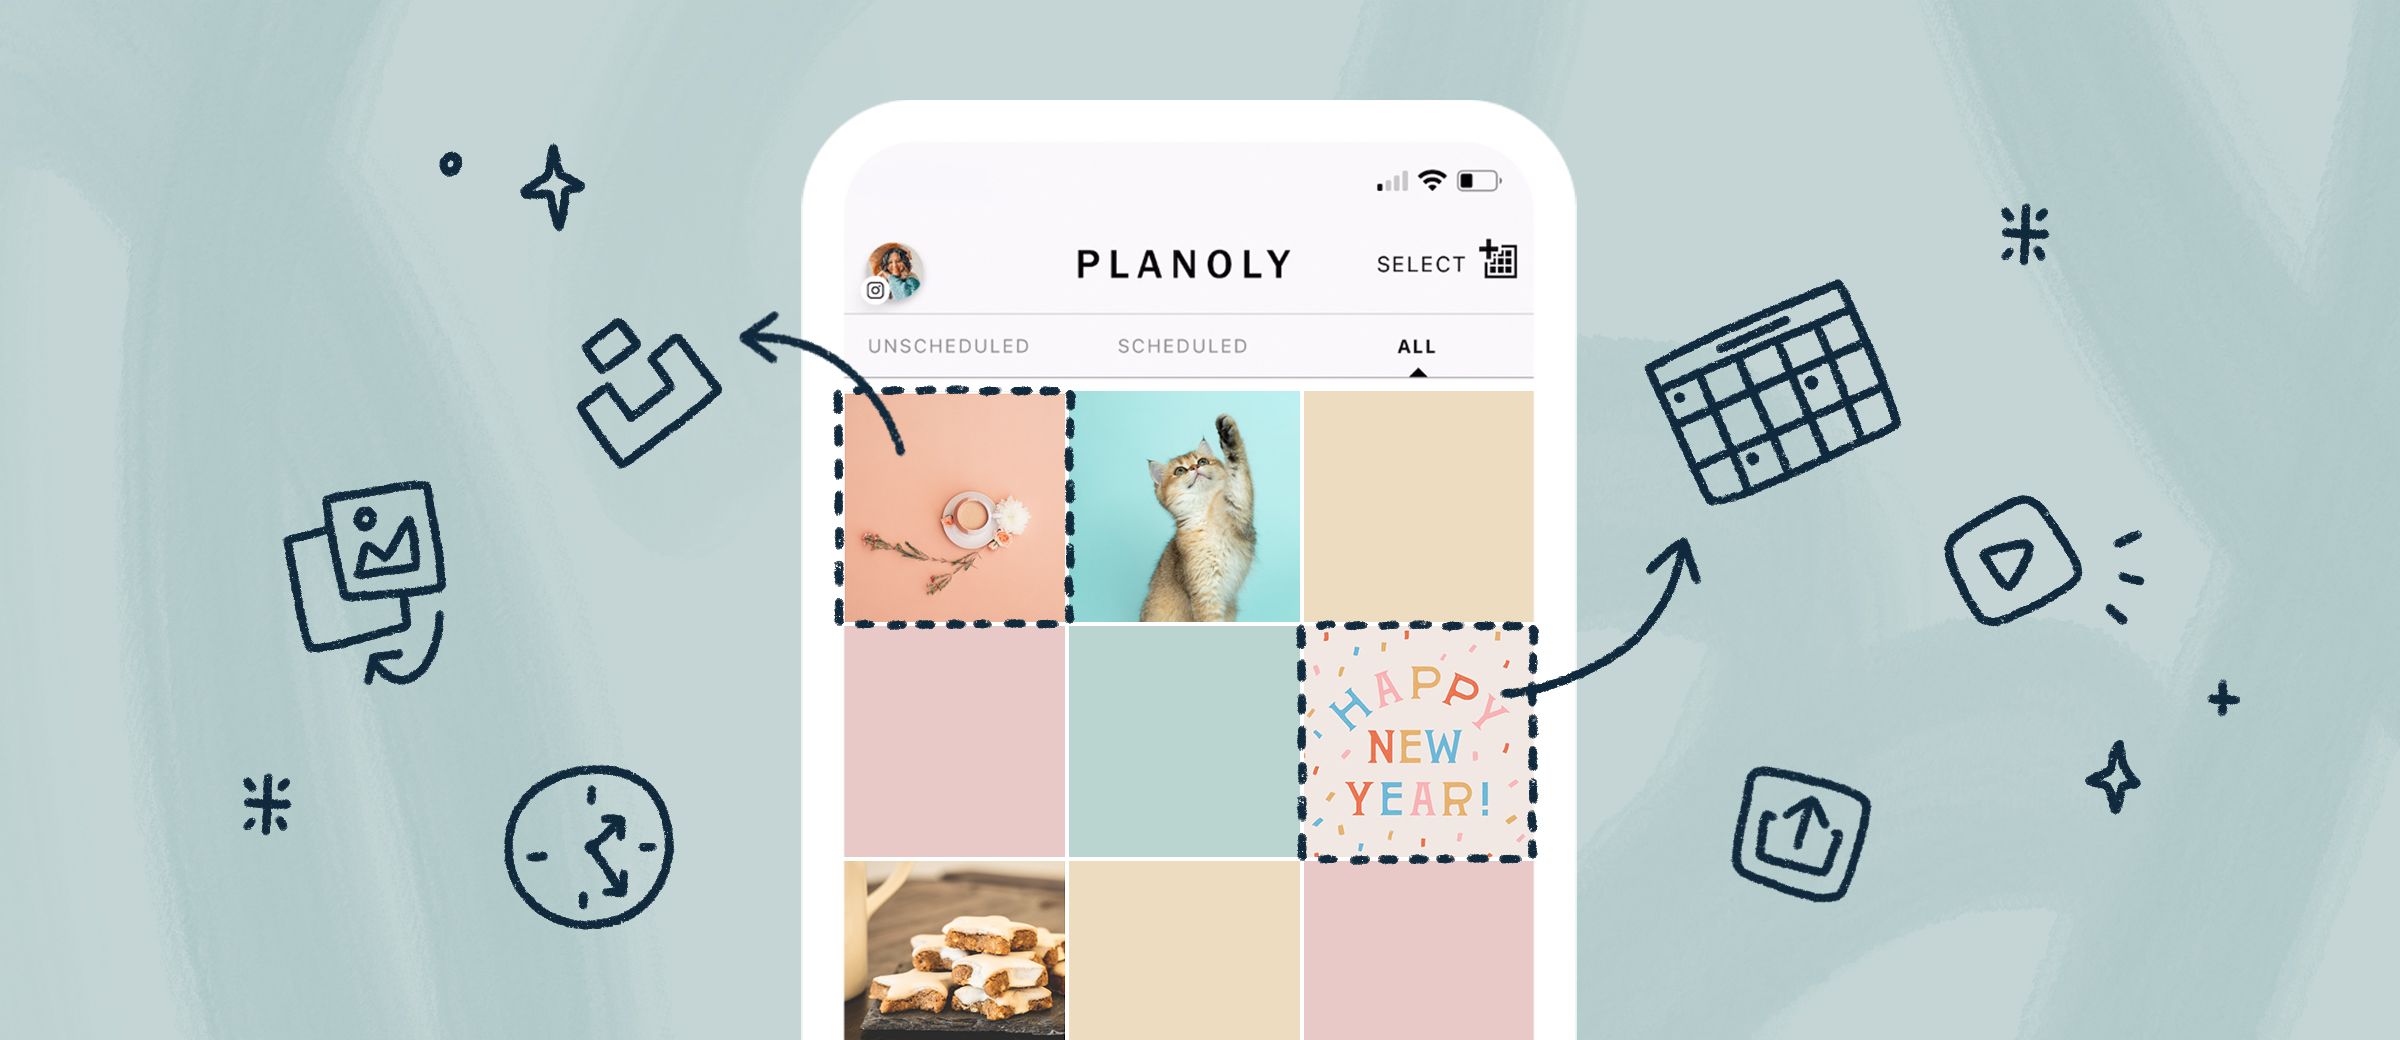 The Benefits of Using a Paid PLANOLY Account